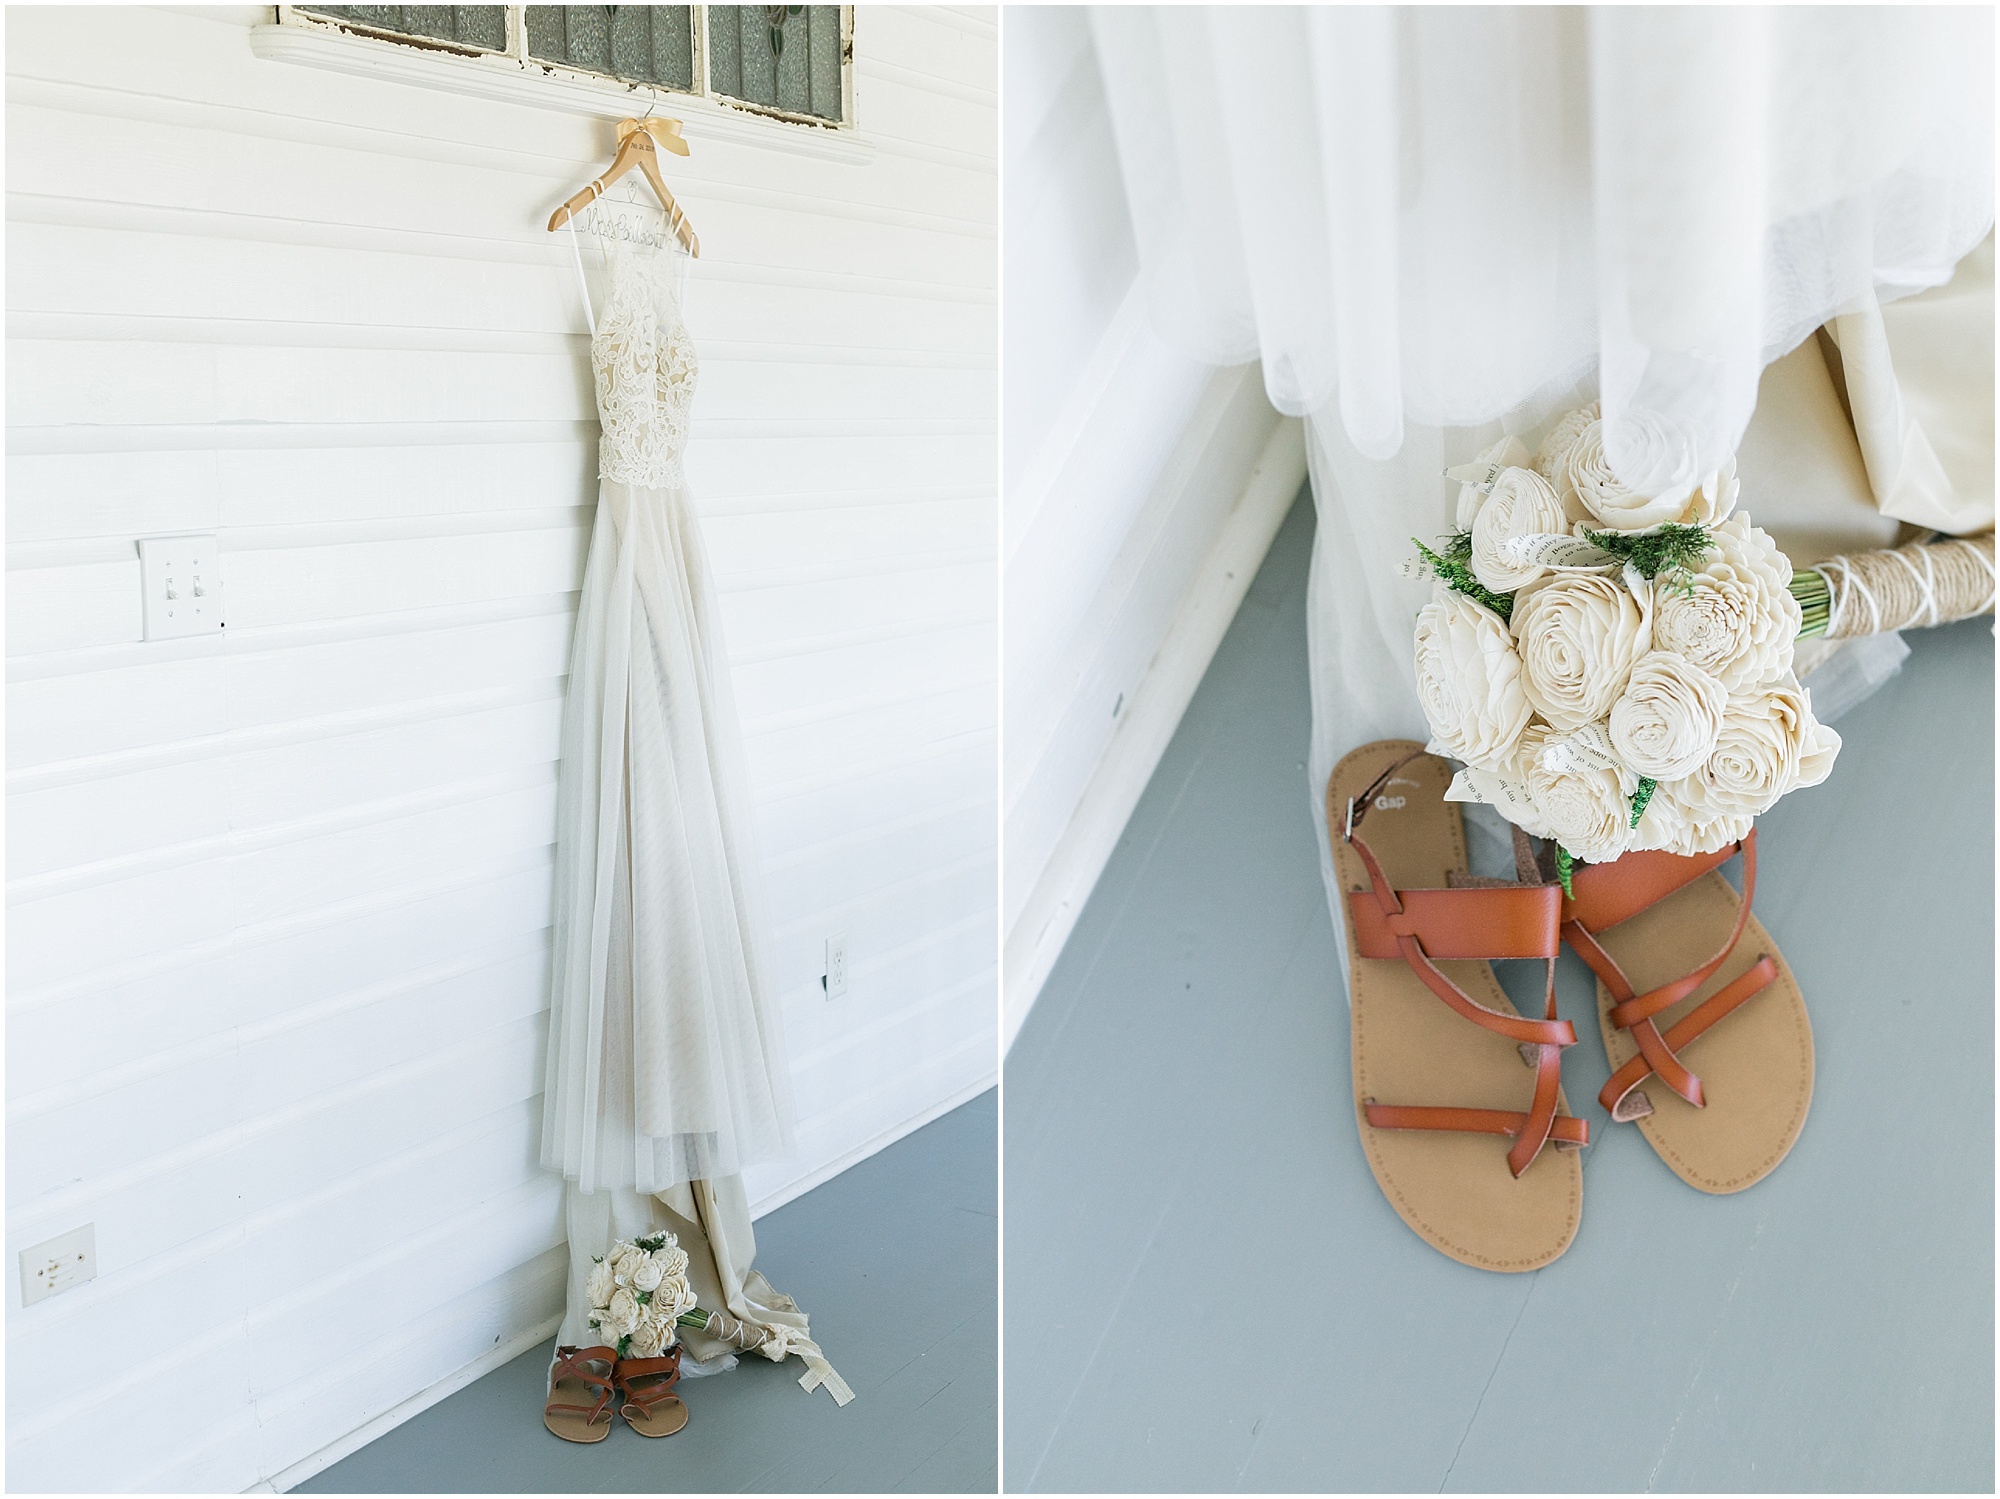 Wedding dress hanging on a window with shoes placed underneath